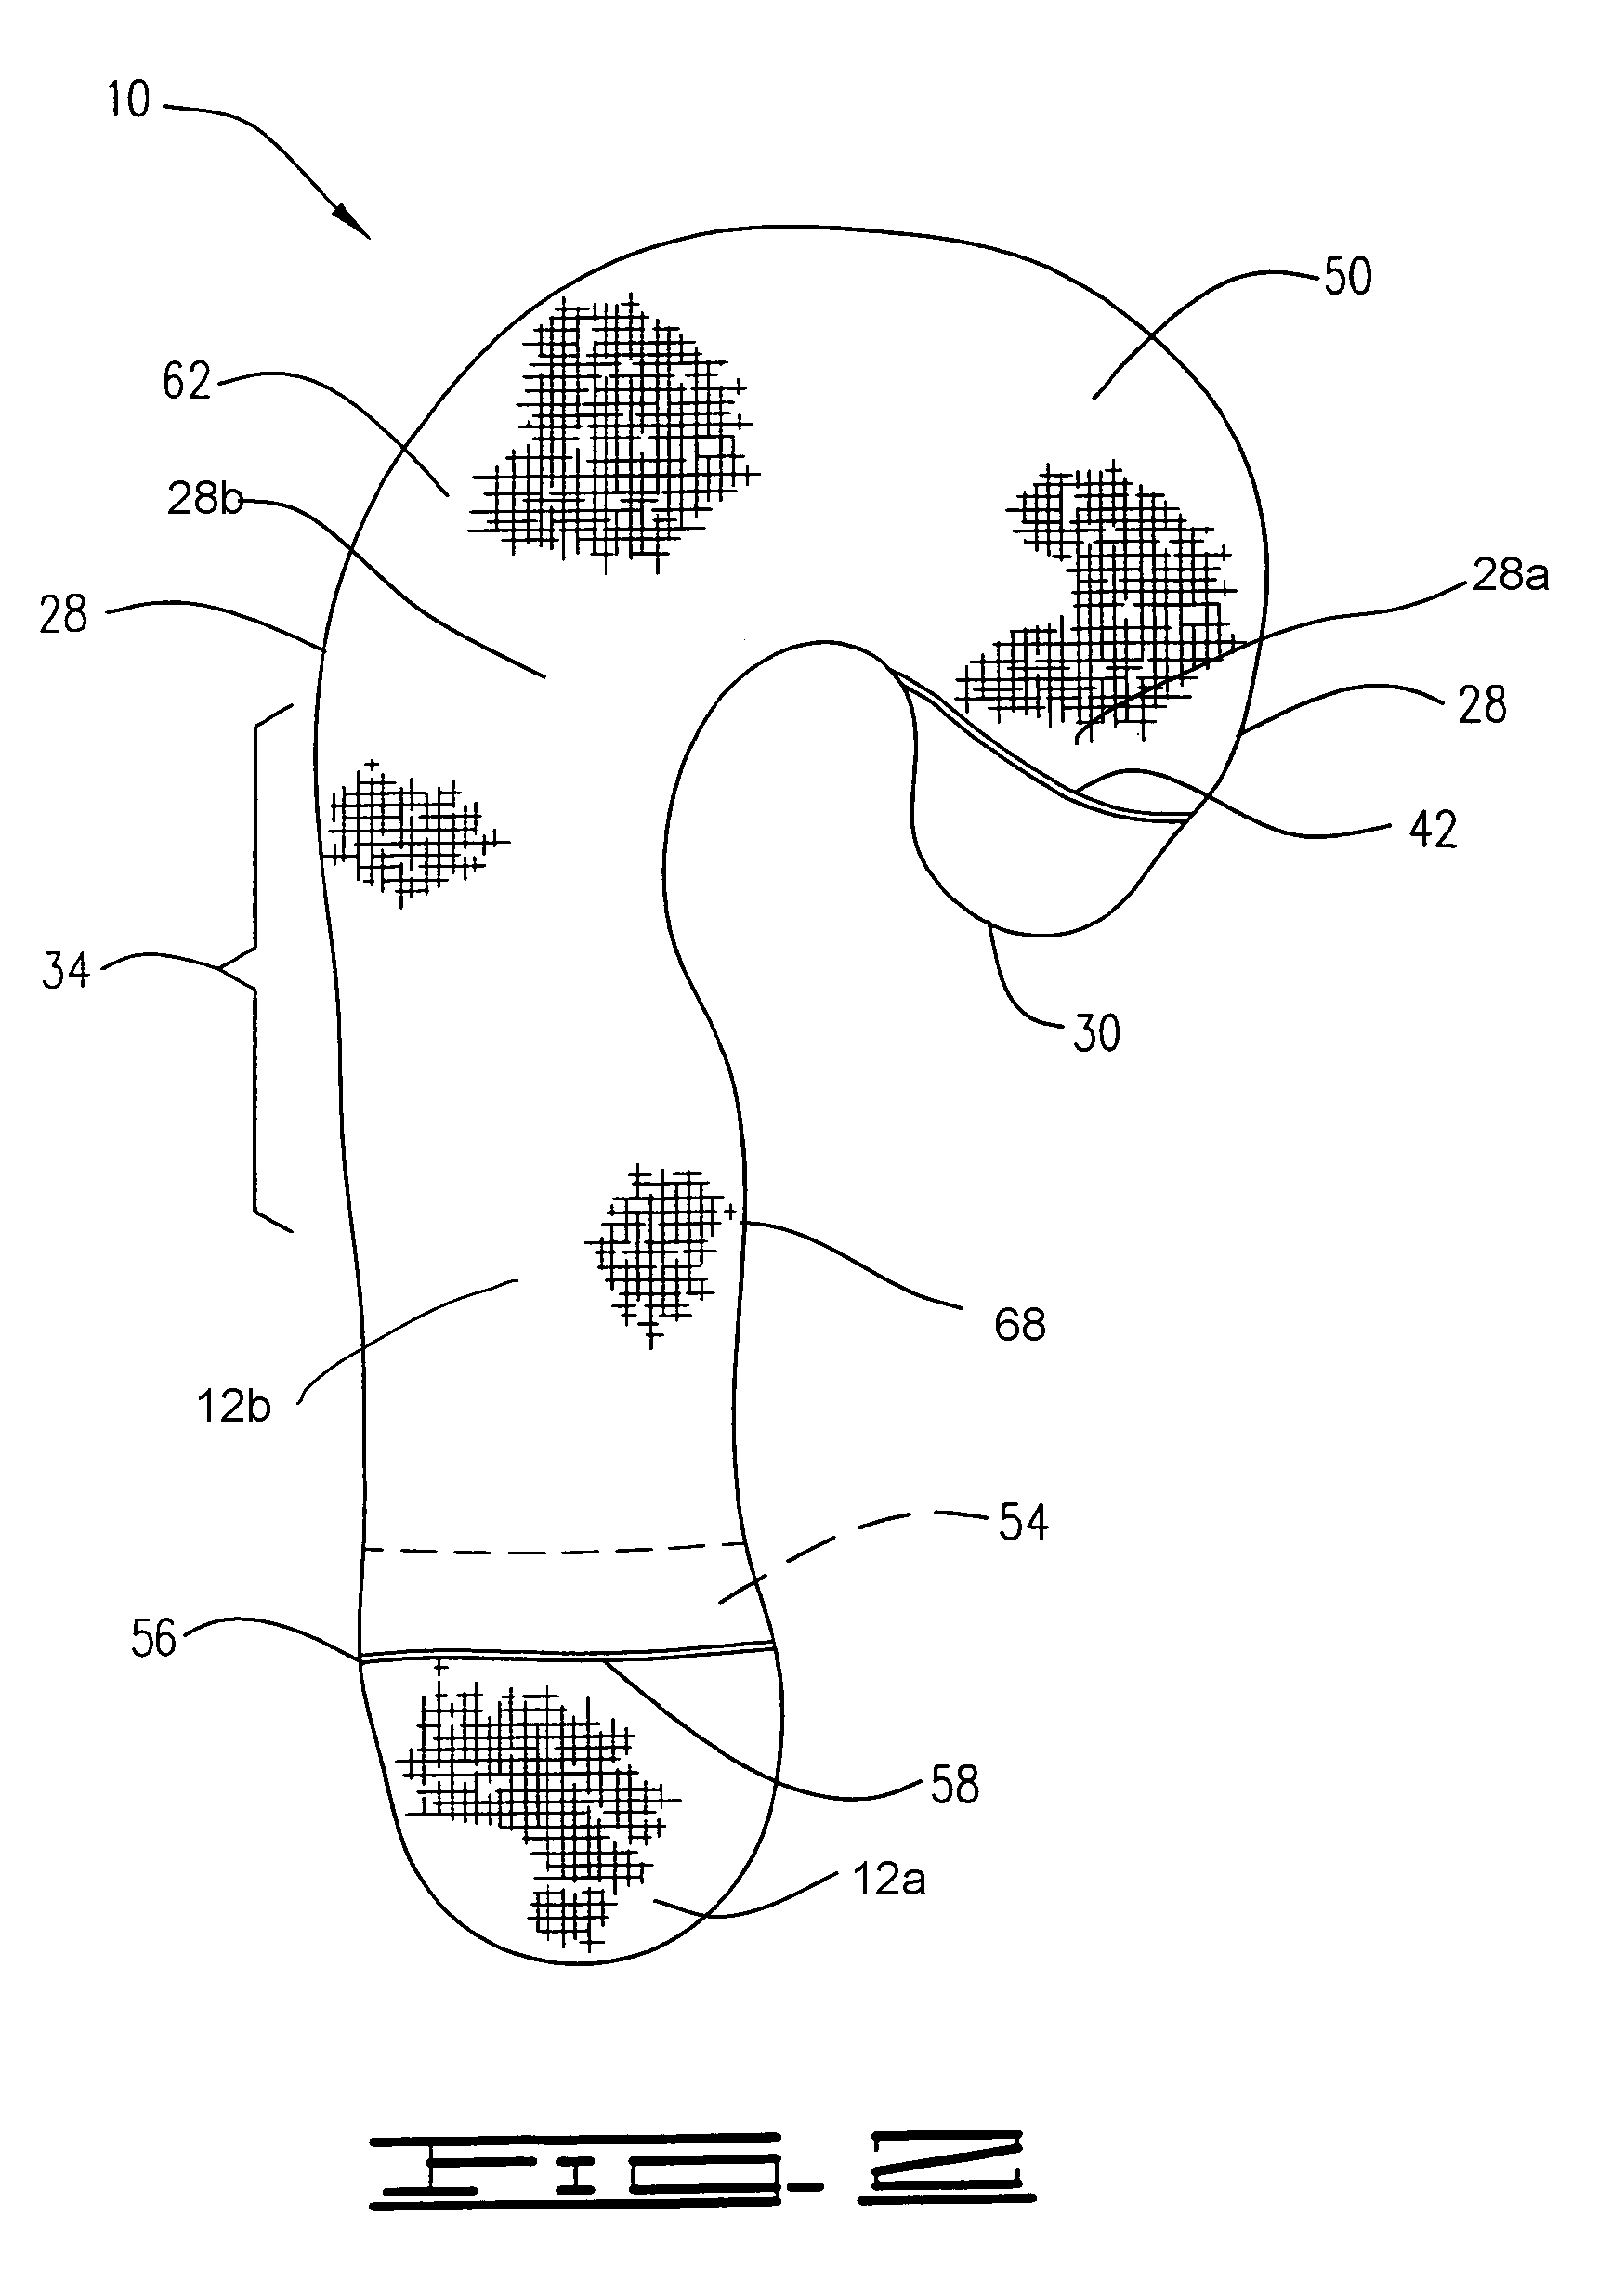 Apparatus and method for question mark-shaped body pillow and support system